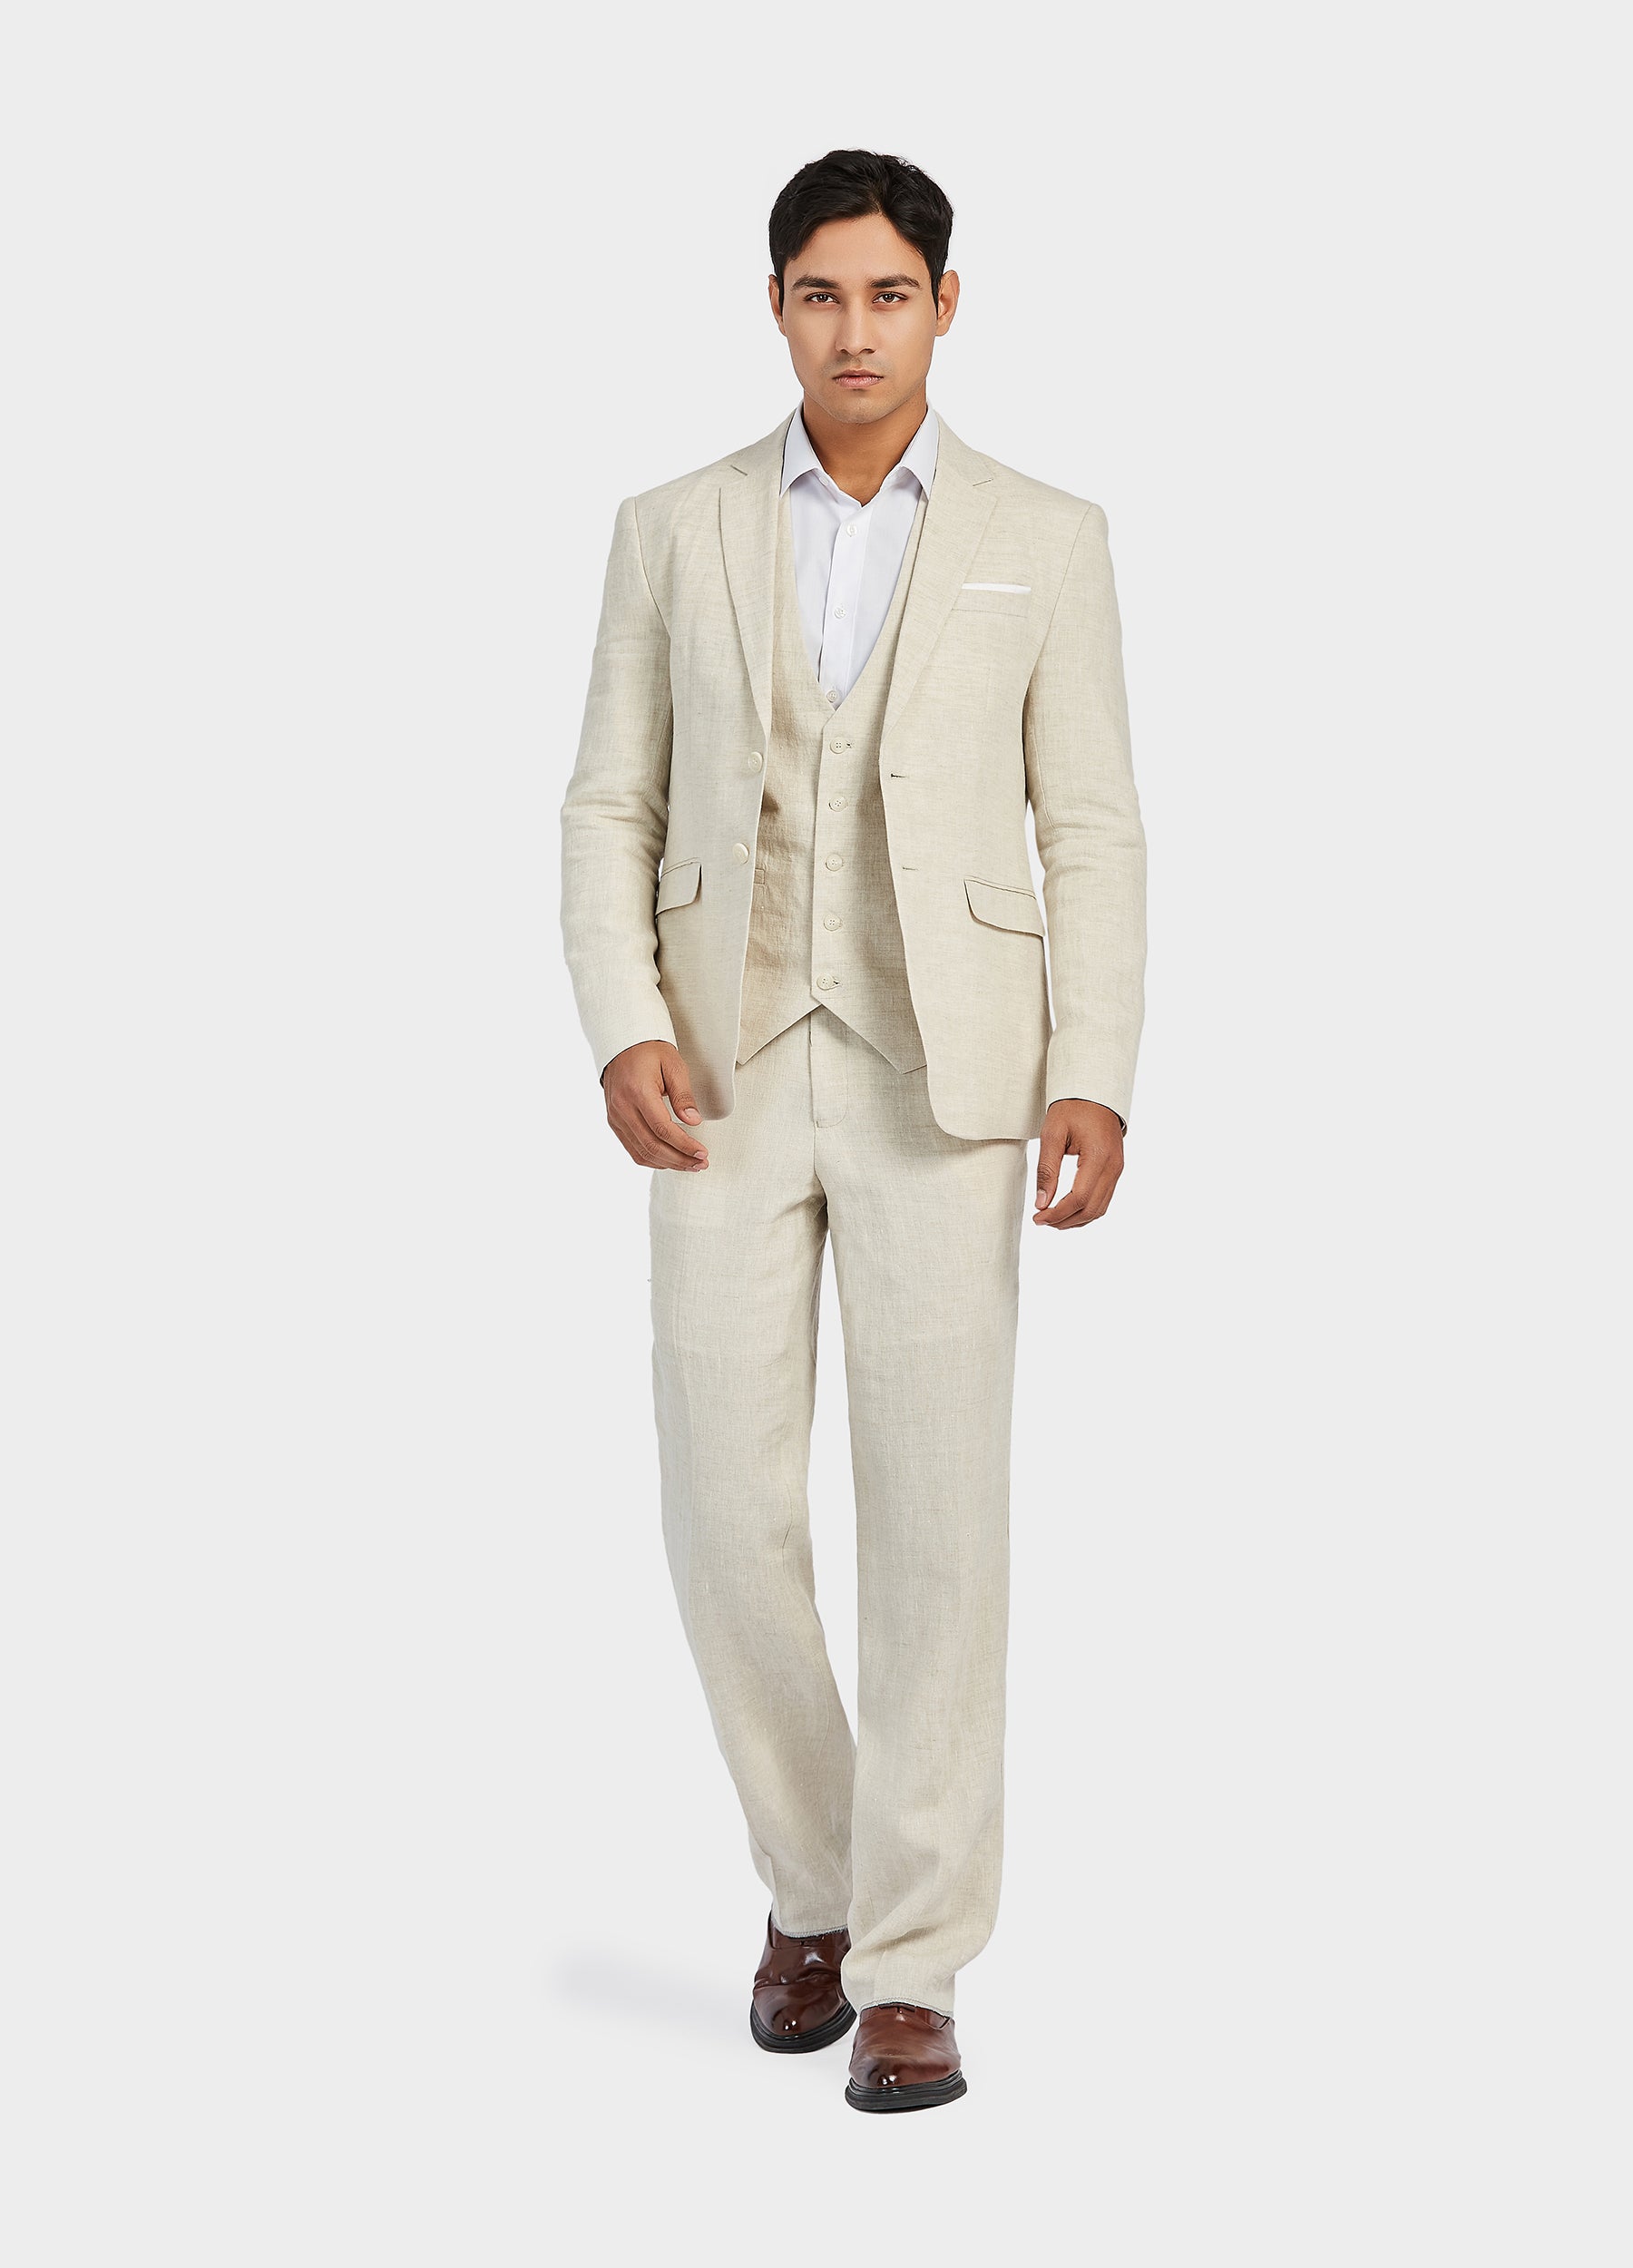 Shop Suits at FINEPEEK | FINEPEEK